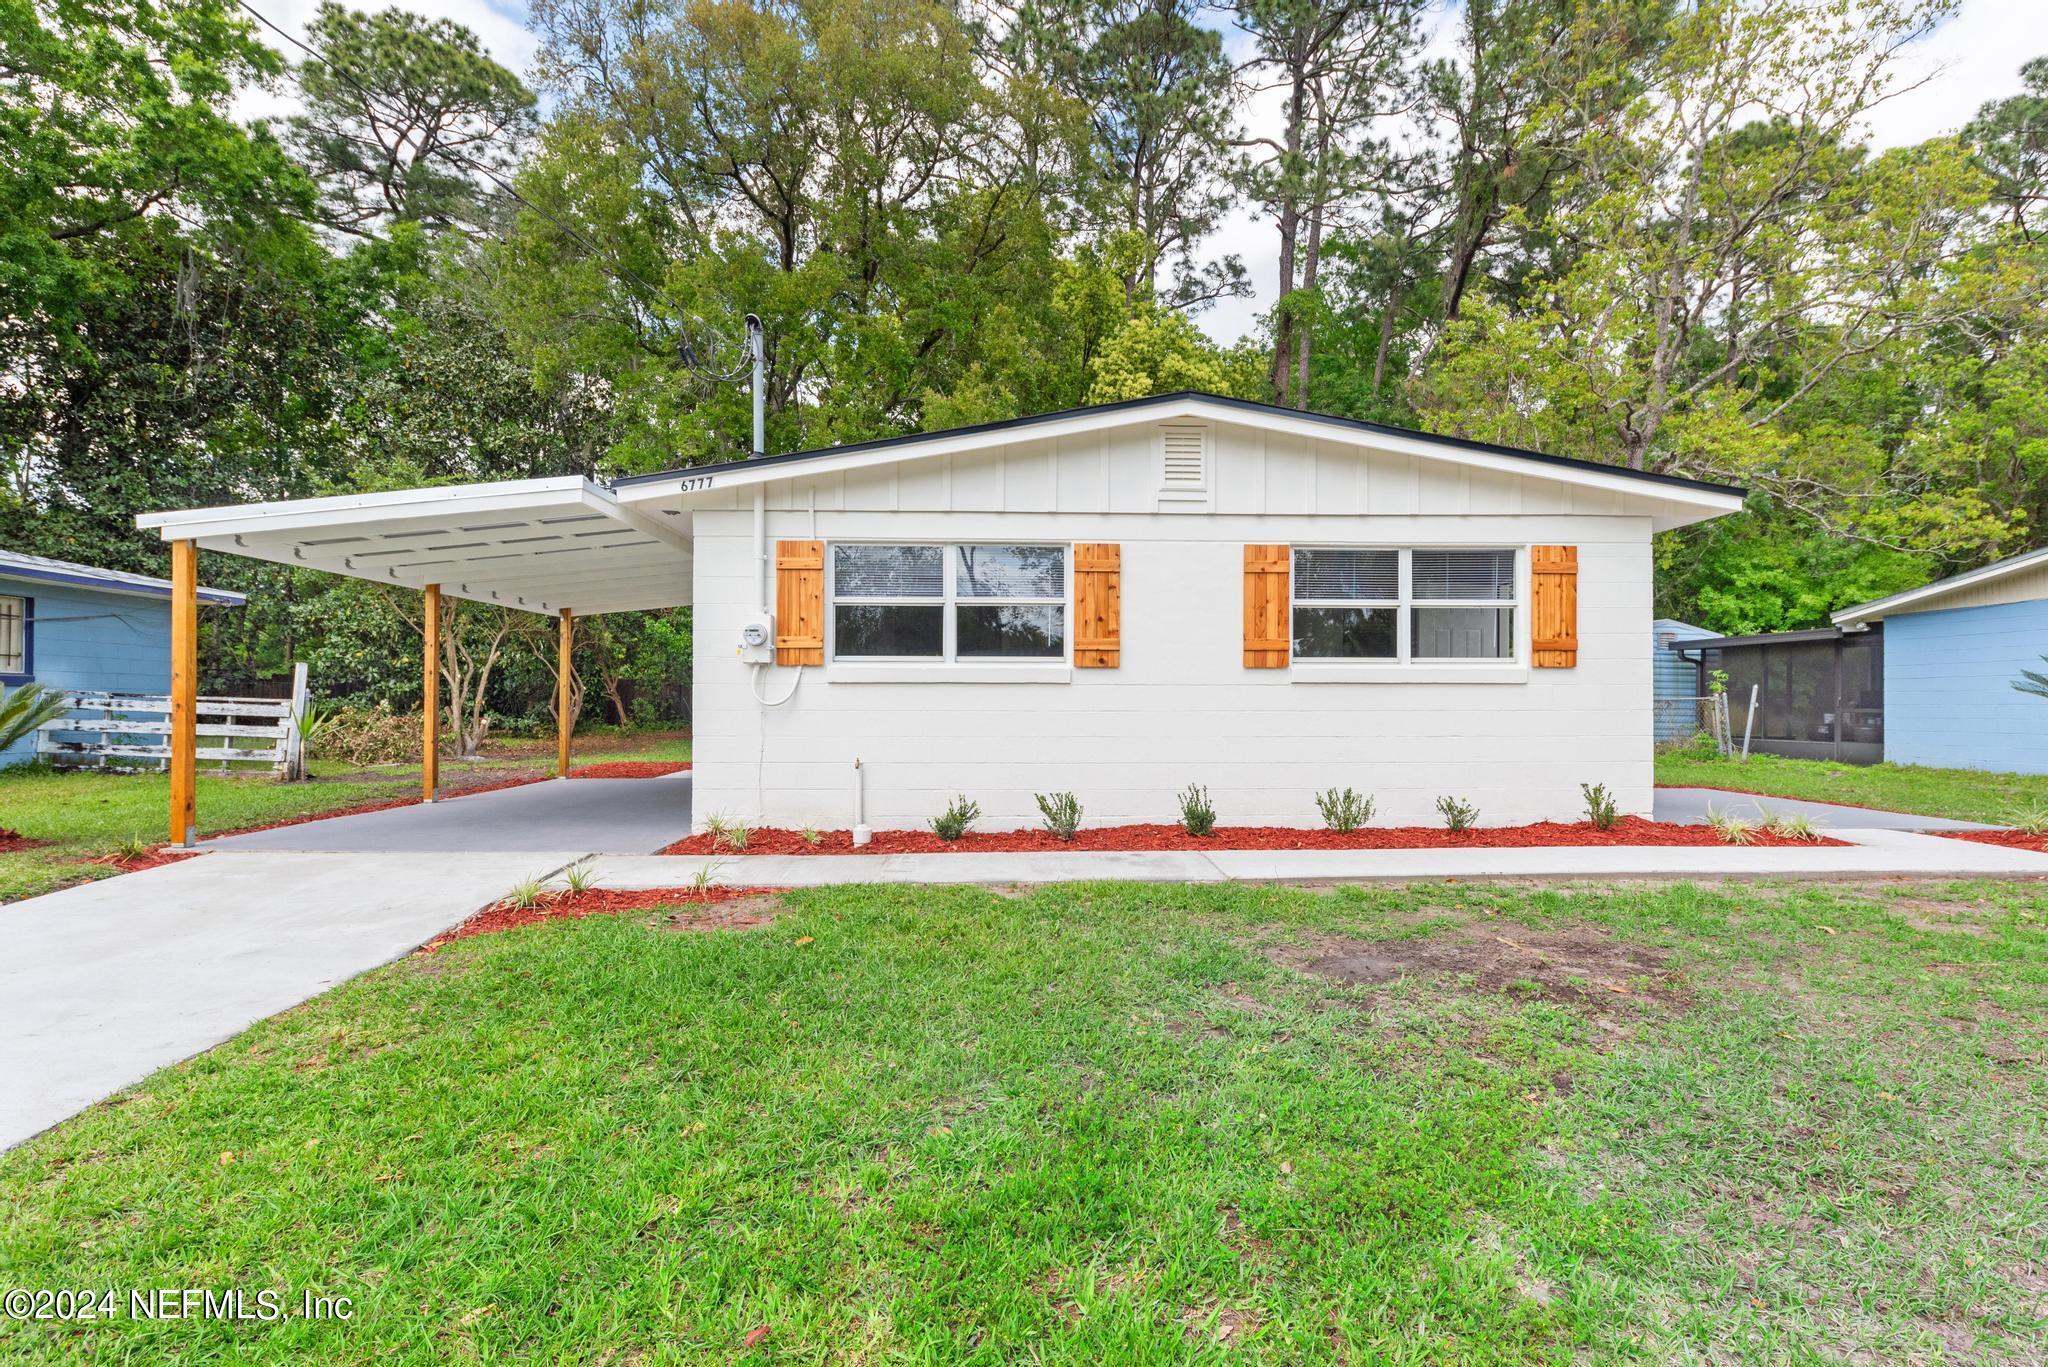 Jacksonville, FL home for sale located at 6777 MISS MUFFET Lane N, Jacksonville, FL 32210